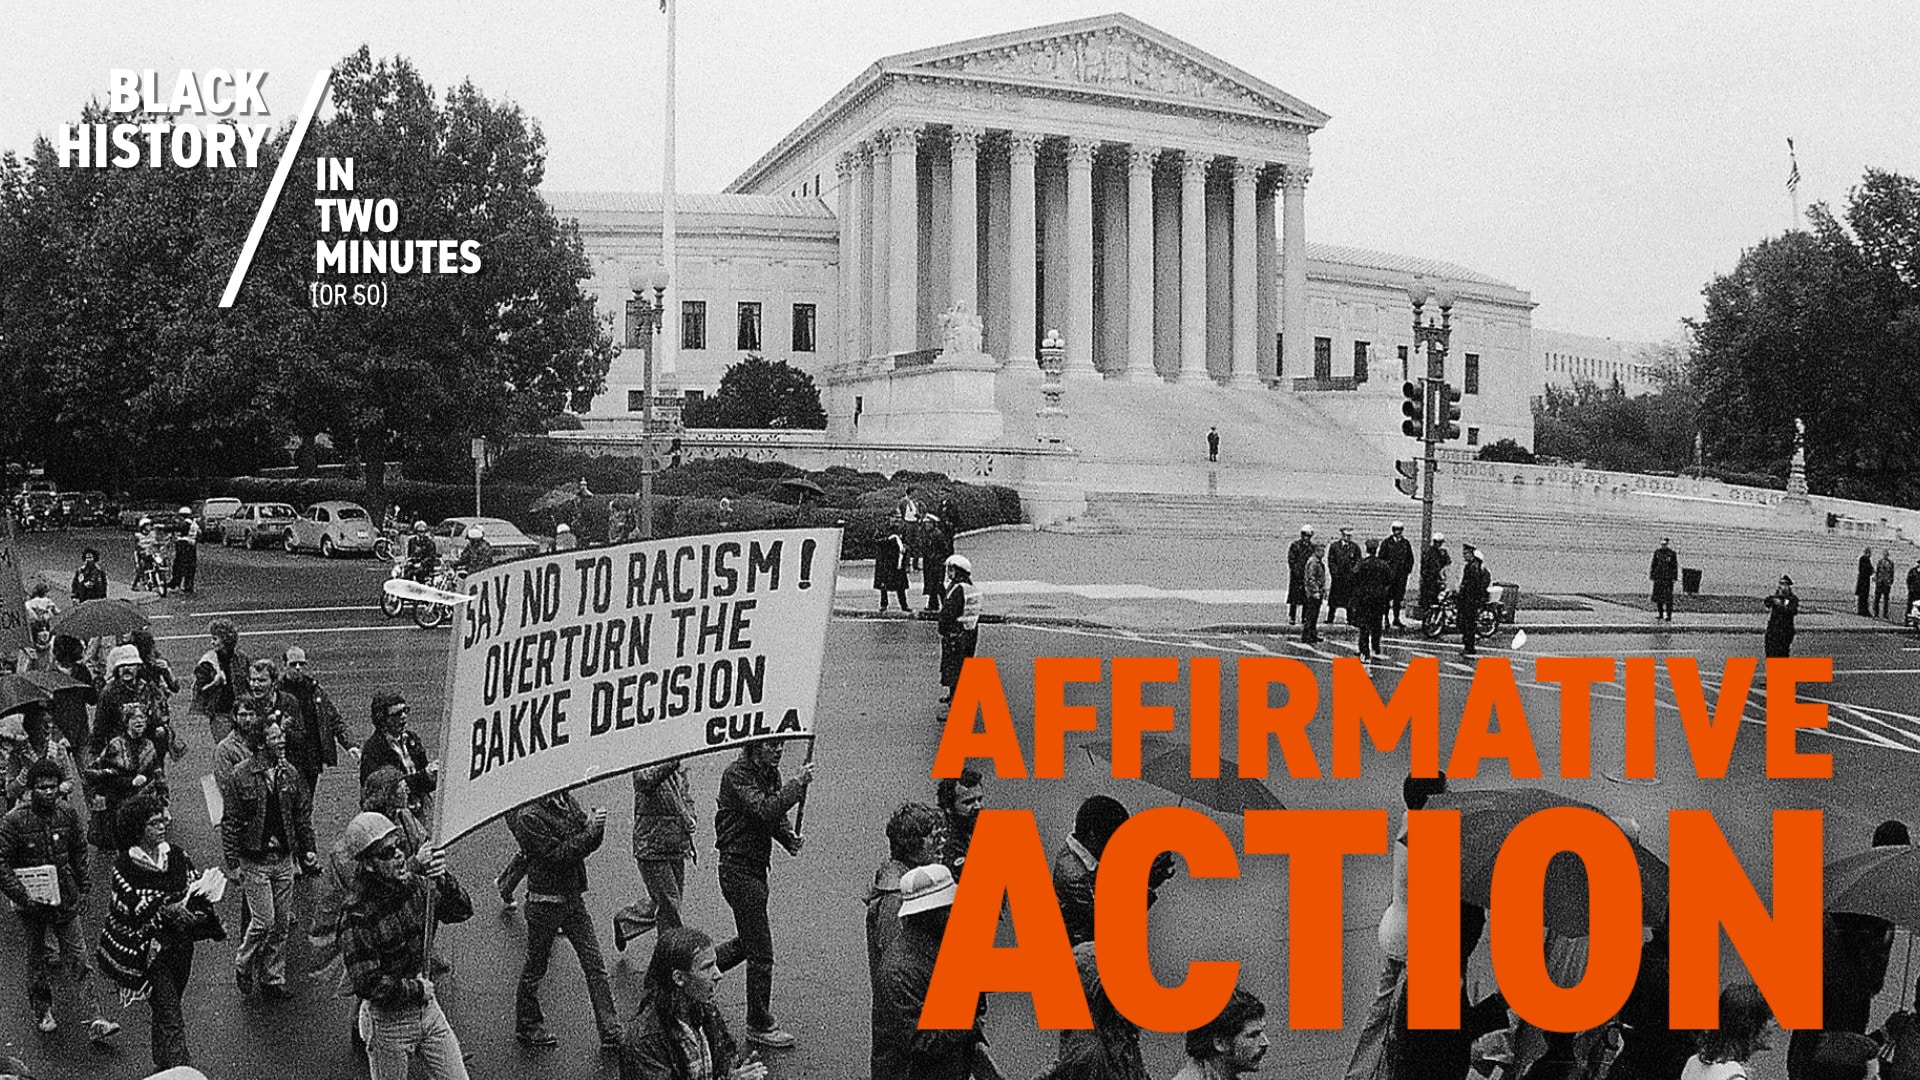 Affirmative Action | Black History in Two Minutes